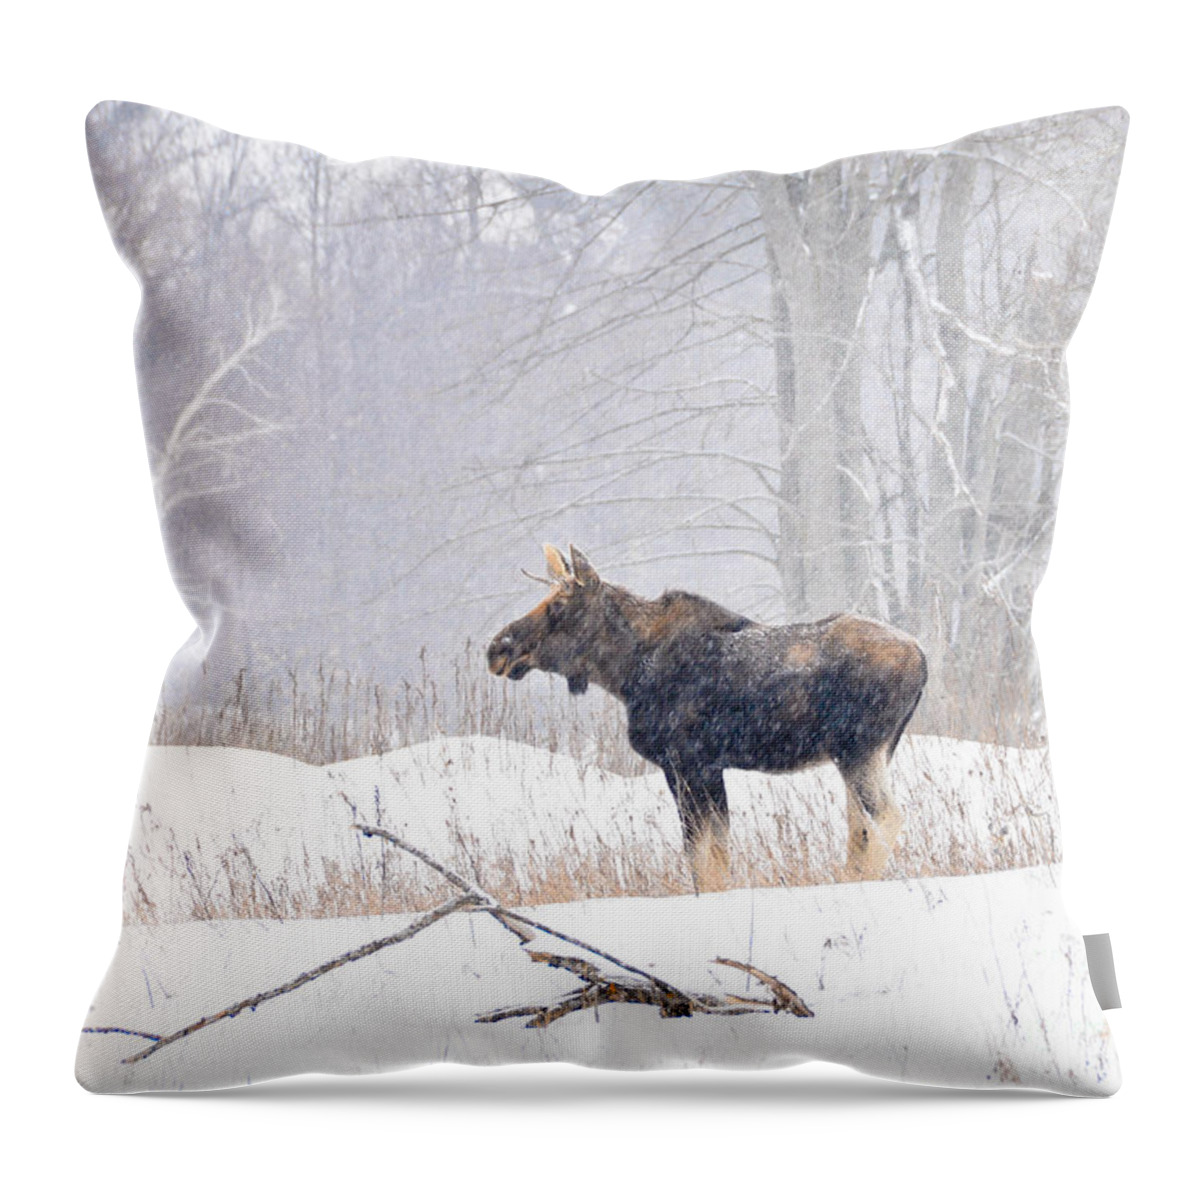 Moose Throw Pillow featuring the photograph Canadian Winter by Cheryl Baxter